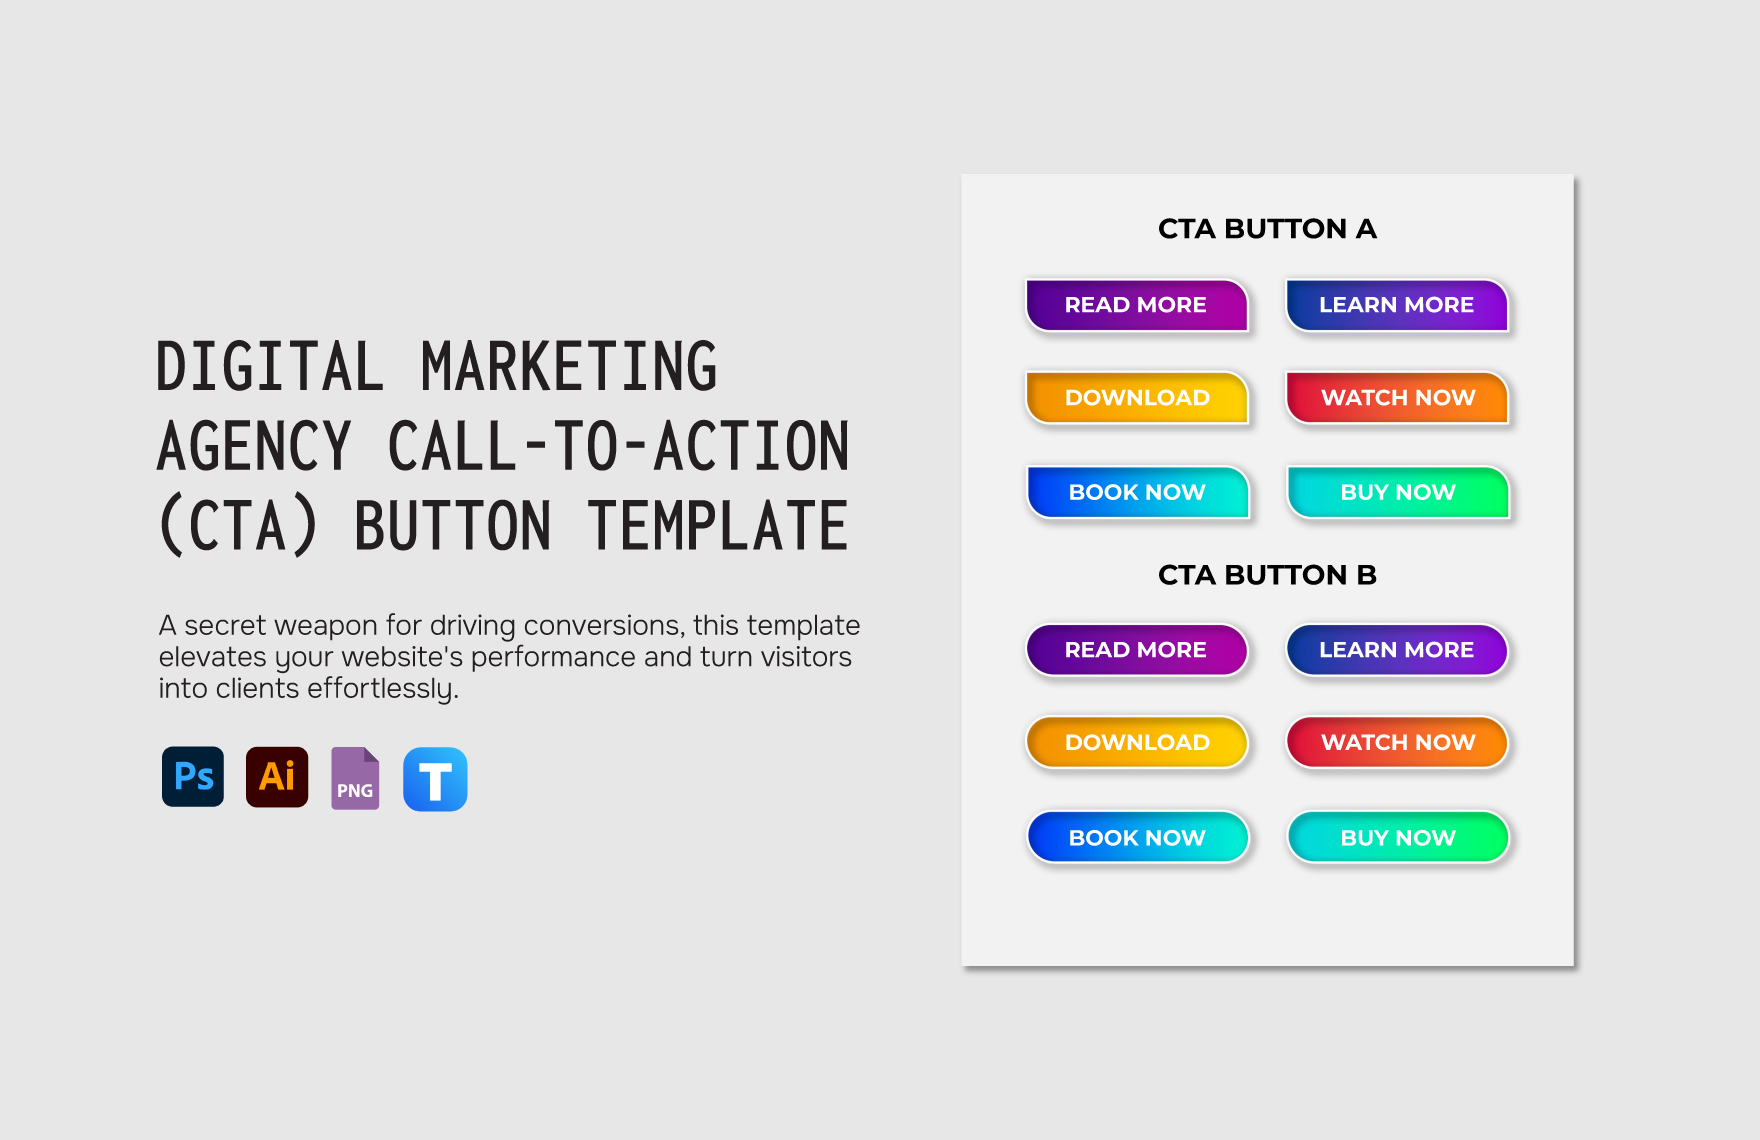 Digital Marketing Agency Call-to-Action (CTA) Button Template